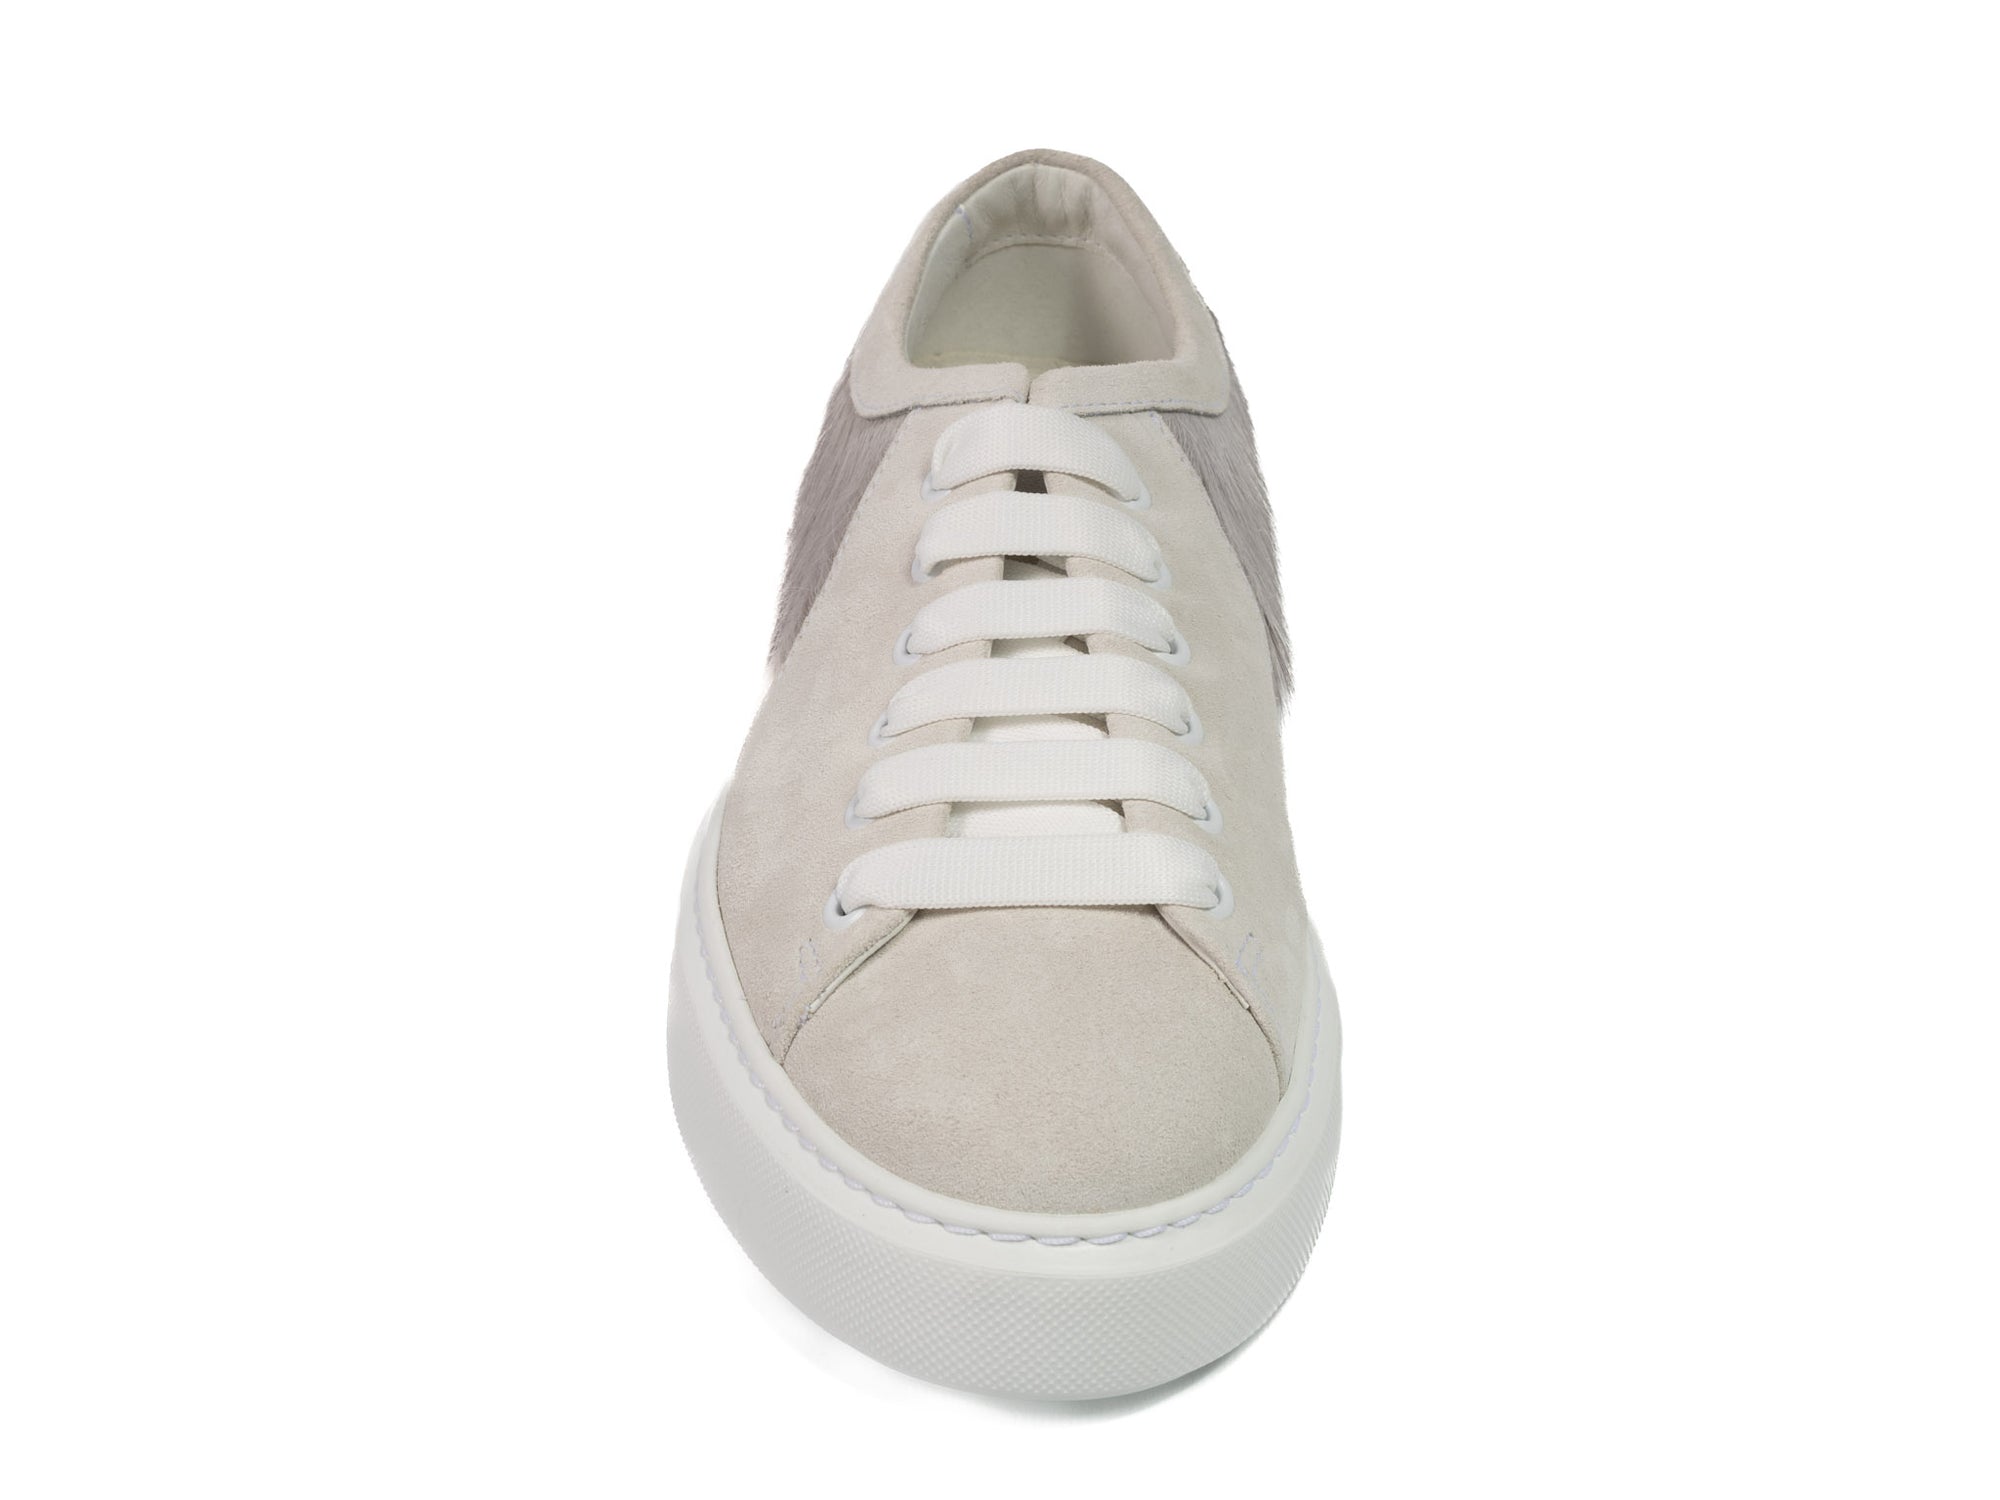 Grey Hair-on-hide Trainer Model 001 with White Suede